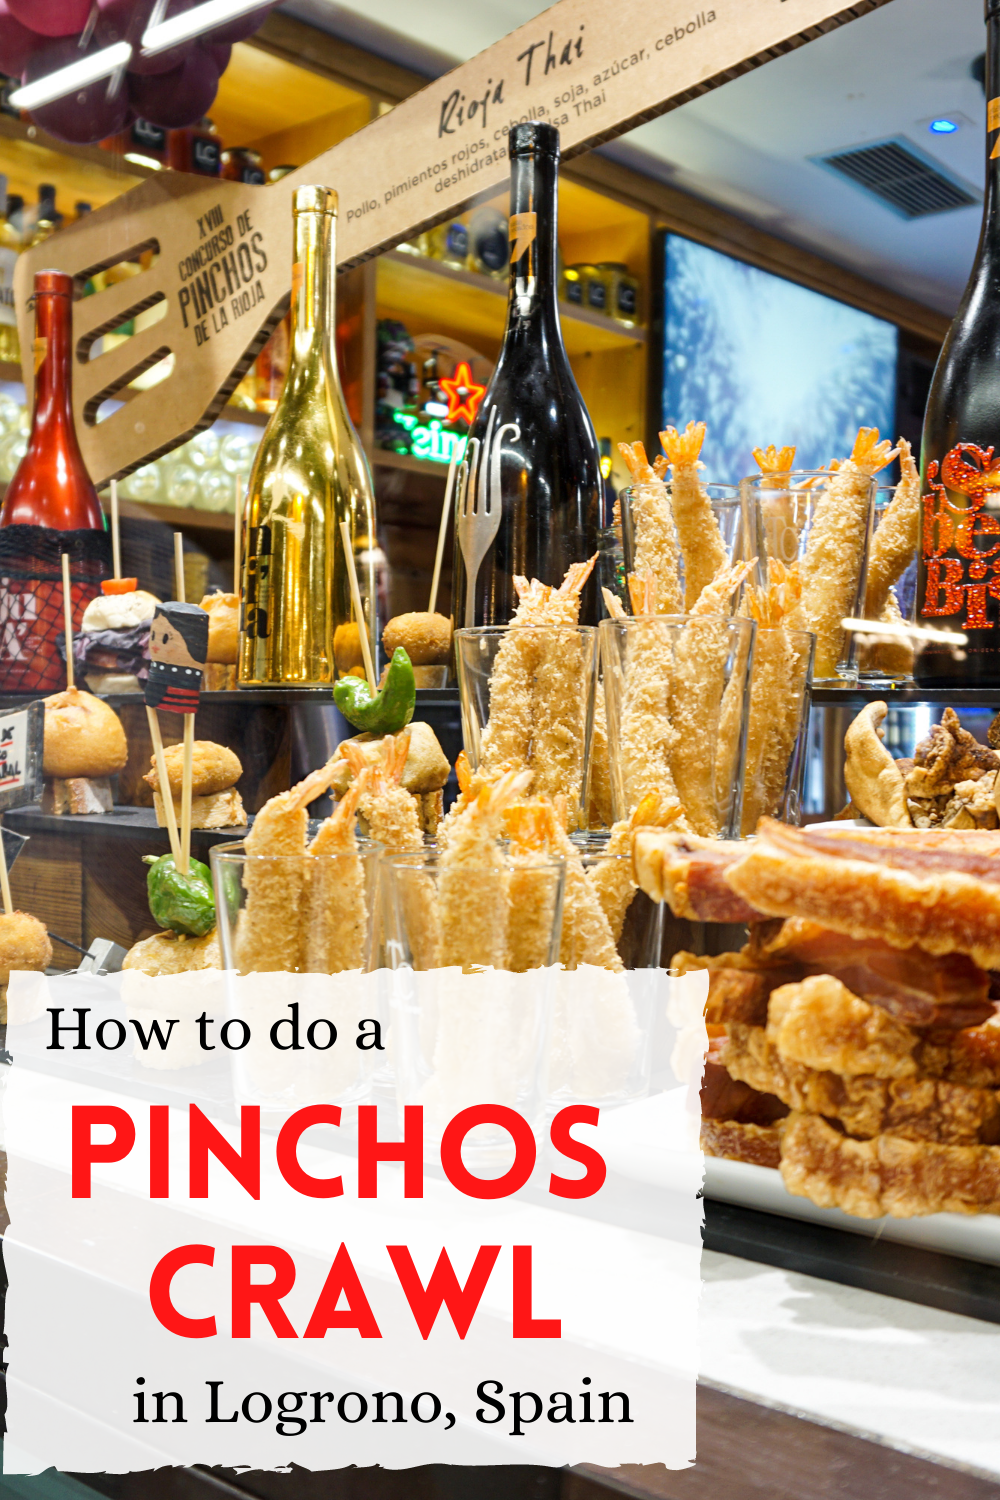 Something that you may not know about, is something called a pinchos crawl. The pinchos crawl, is a whole eating and drinking experience along a street in Logrono, Spain. Each restaurant along the street serves a small dish called a pincho for a few euros as well as wine and beer. Pinchos are bite sized appetizers and usually served with a toothpick or on a piece of bread. Pinchos are similar to tapas but called something different depending on what part of the country you are in. Each restaurant offers a variety of options.